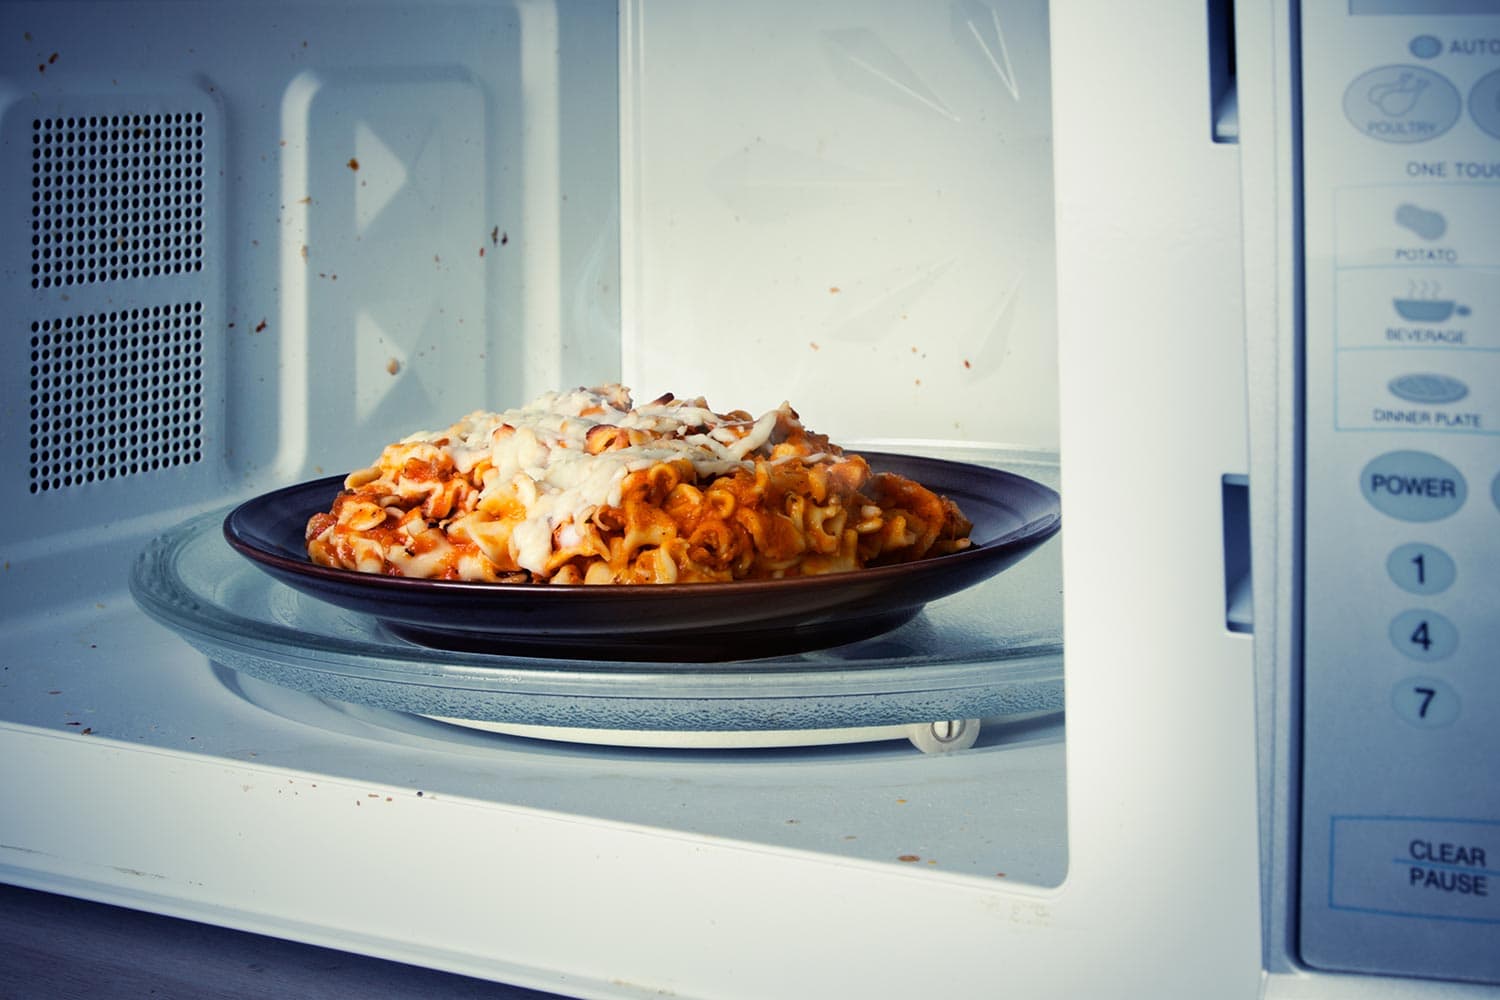 A plate of leftover lasagna is reheated in a microwave